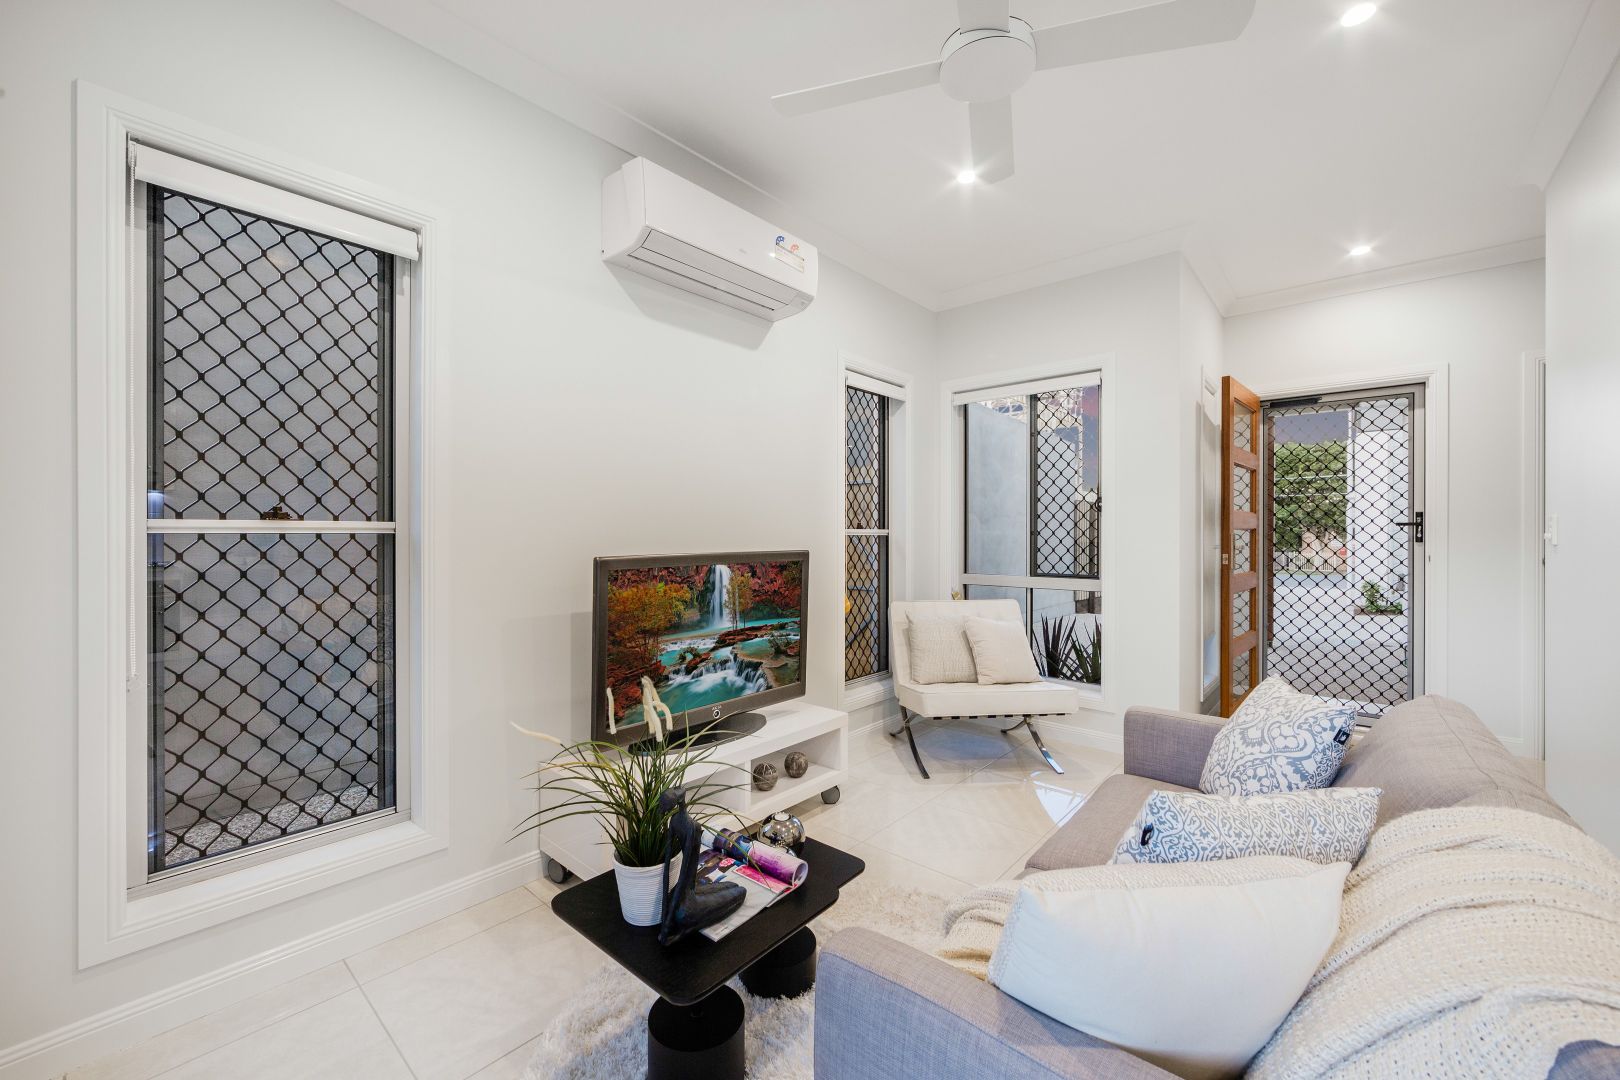 3/165 Stratton Terrace, Manly QLD 4179, Image 2